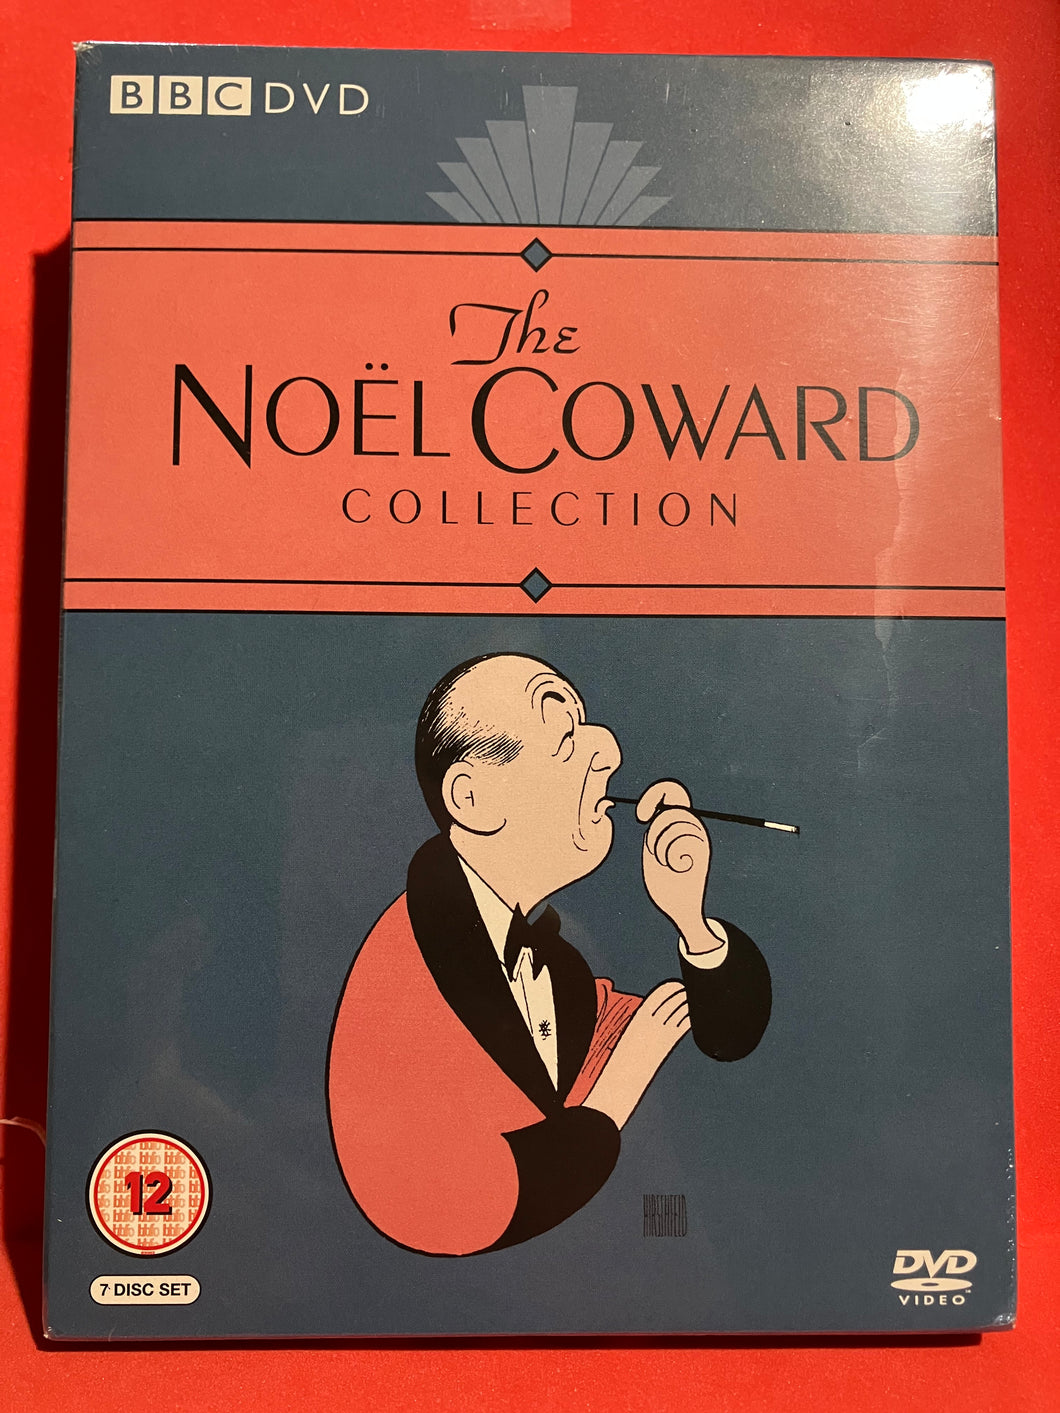 THE NOEL COWARD COLLECTION - 7 DISC SET - DVD (SEALED)